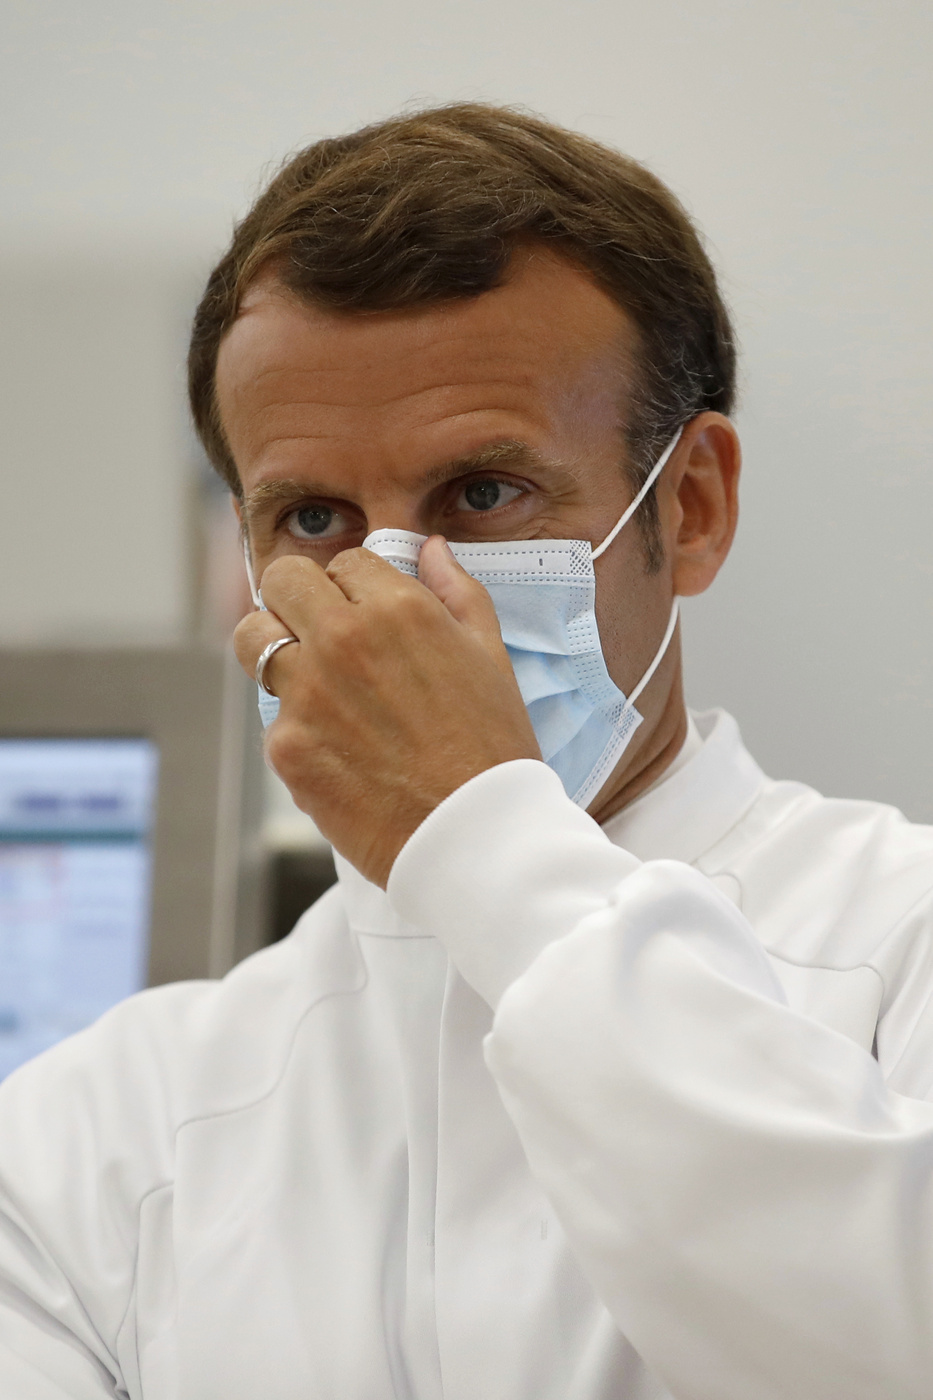 French President Emmanuel Macron adjusts his mask as he visits an industrial development laboratory at the French drugmaker's vaccine unit Sanofi Pasteur plant in Marcy-l'Etoile, near Lyon, central France, Tuesday, June 16, 2020. The visit comes after rival pharmaceutical company AstraZeneca this weekend announced a deal to supply 400 million vaccine doses to EU countries, including France. (Gonzalo Fuentes/Pool via AP)